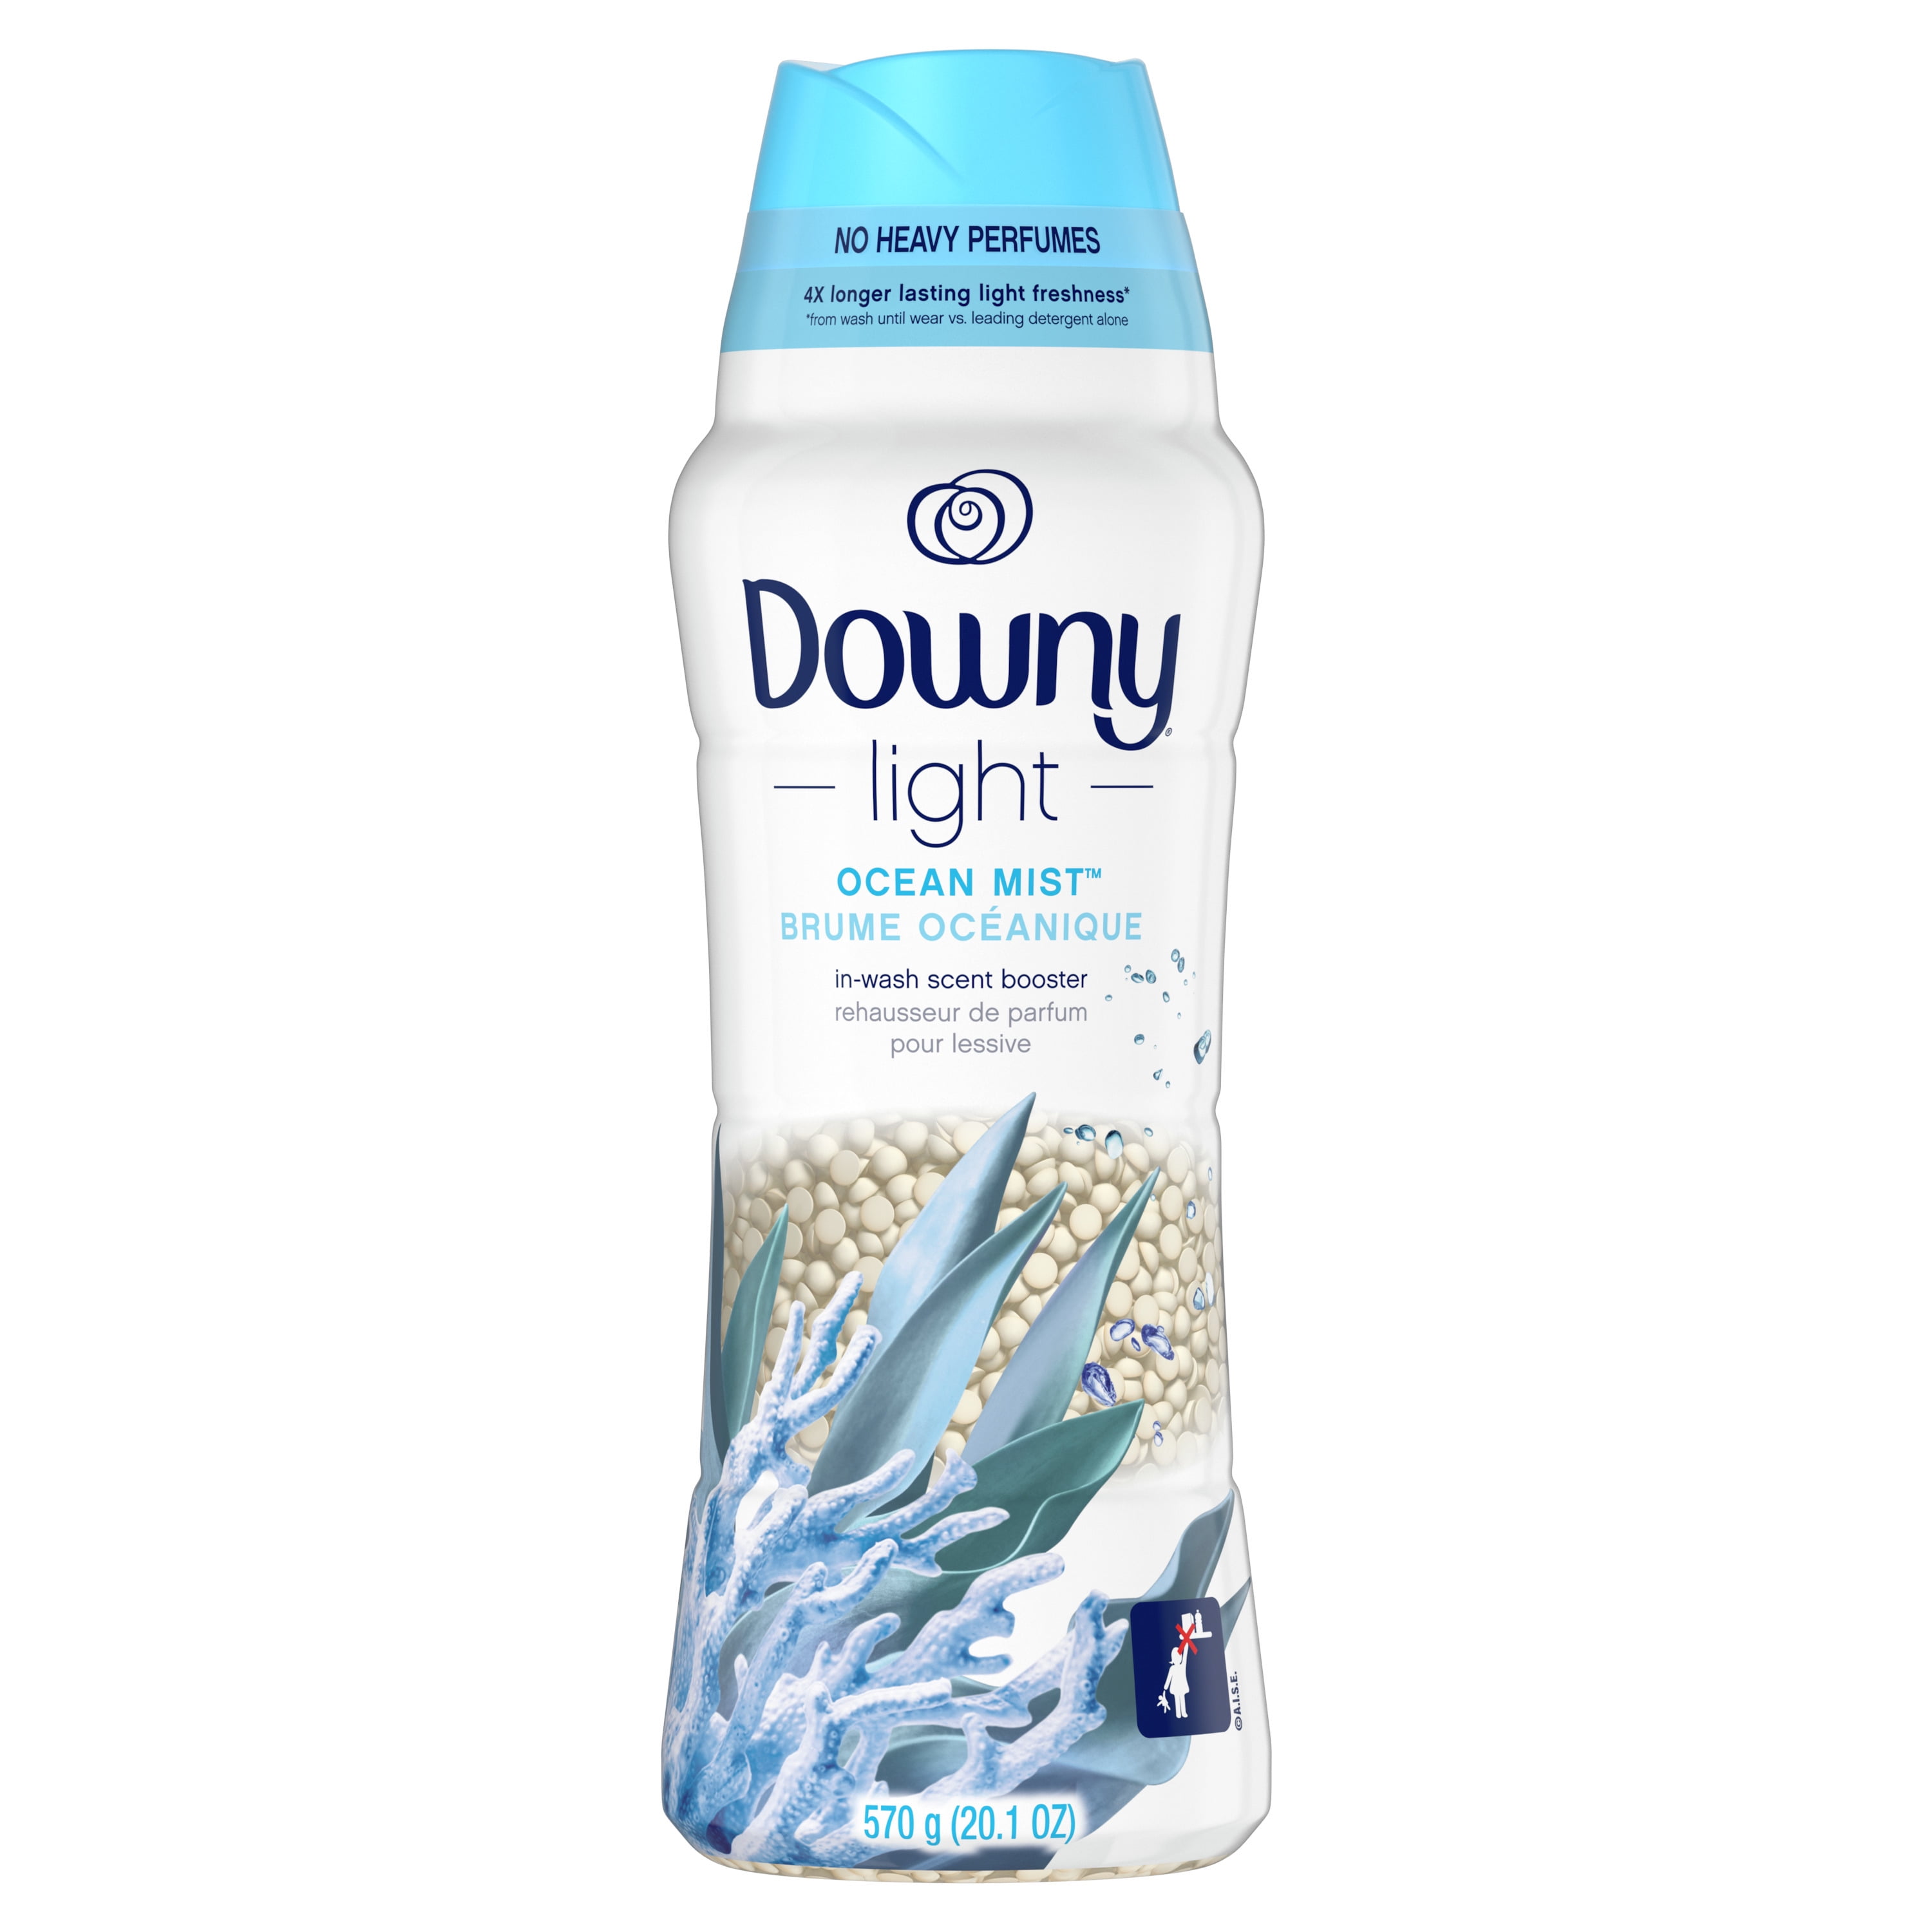 Downy Light Laundry Scent Booster Beads, Ocean Mist, 20.1 oz